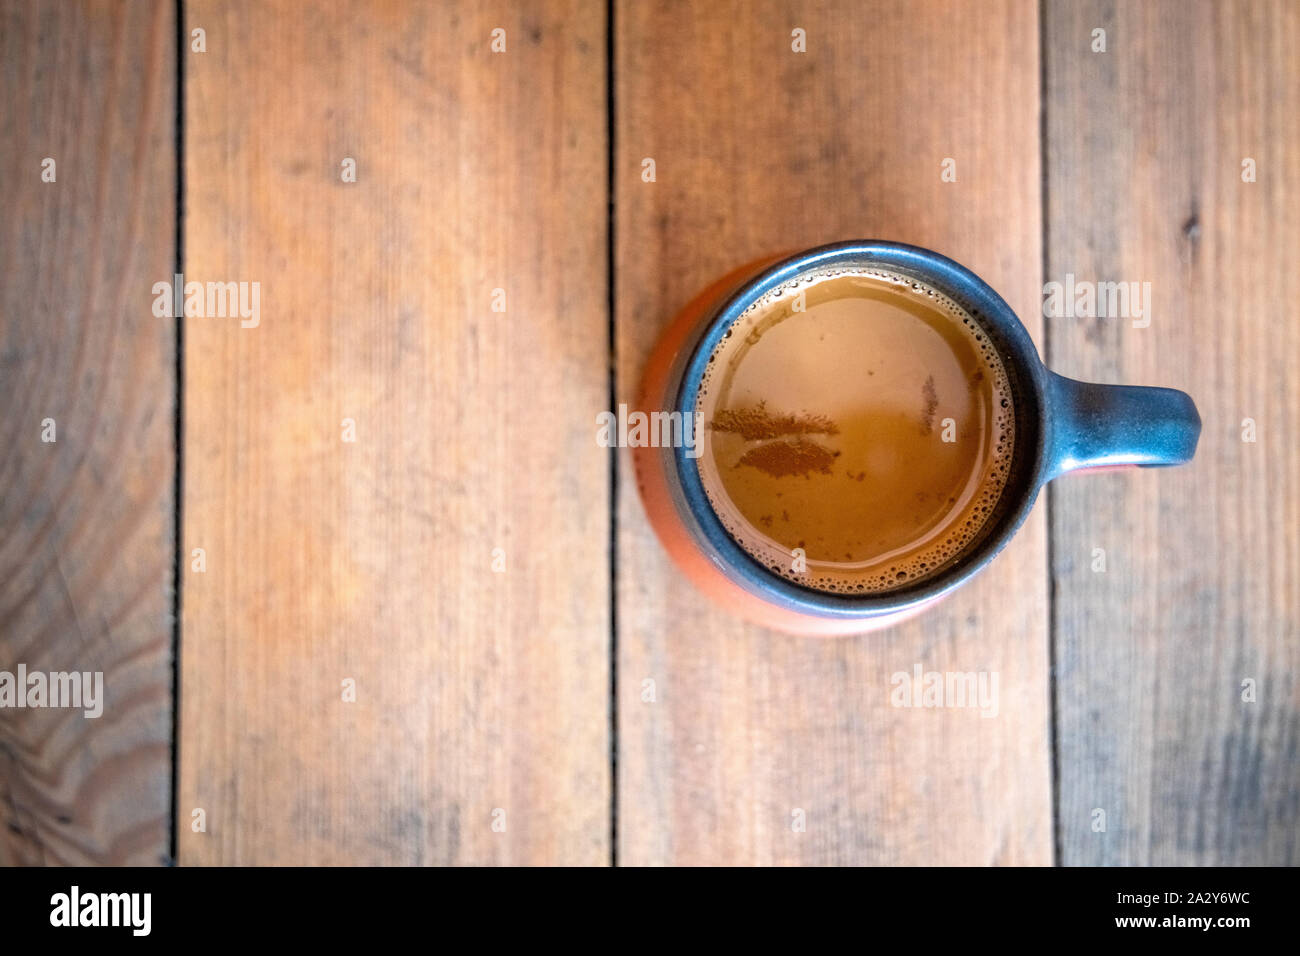 A cup of tea placed on a wooden table. Top view Stock Photo